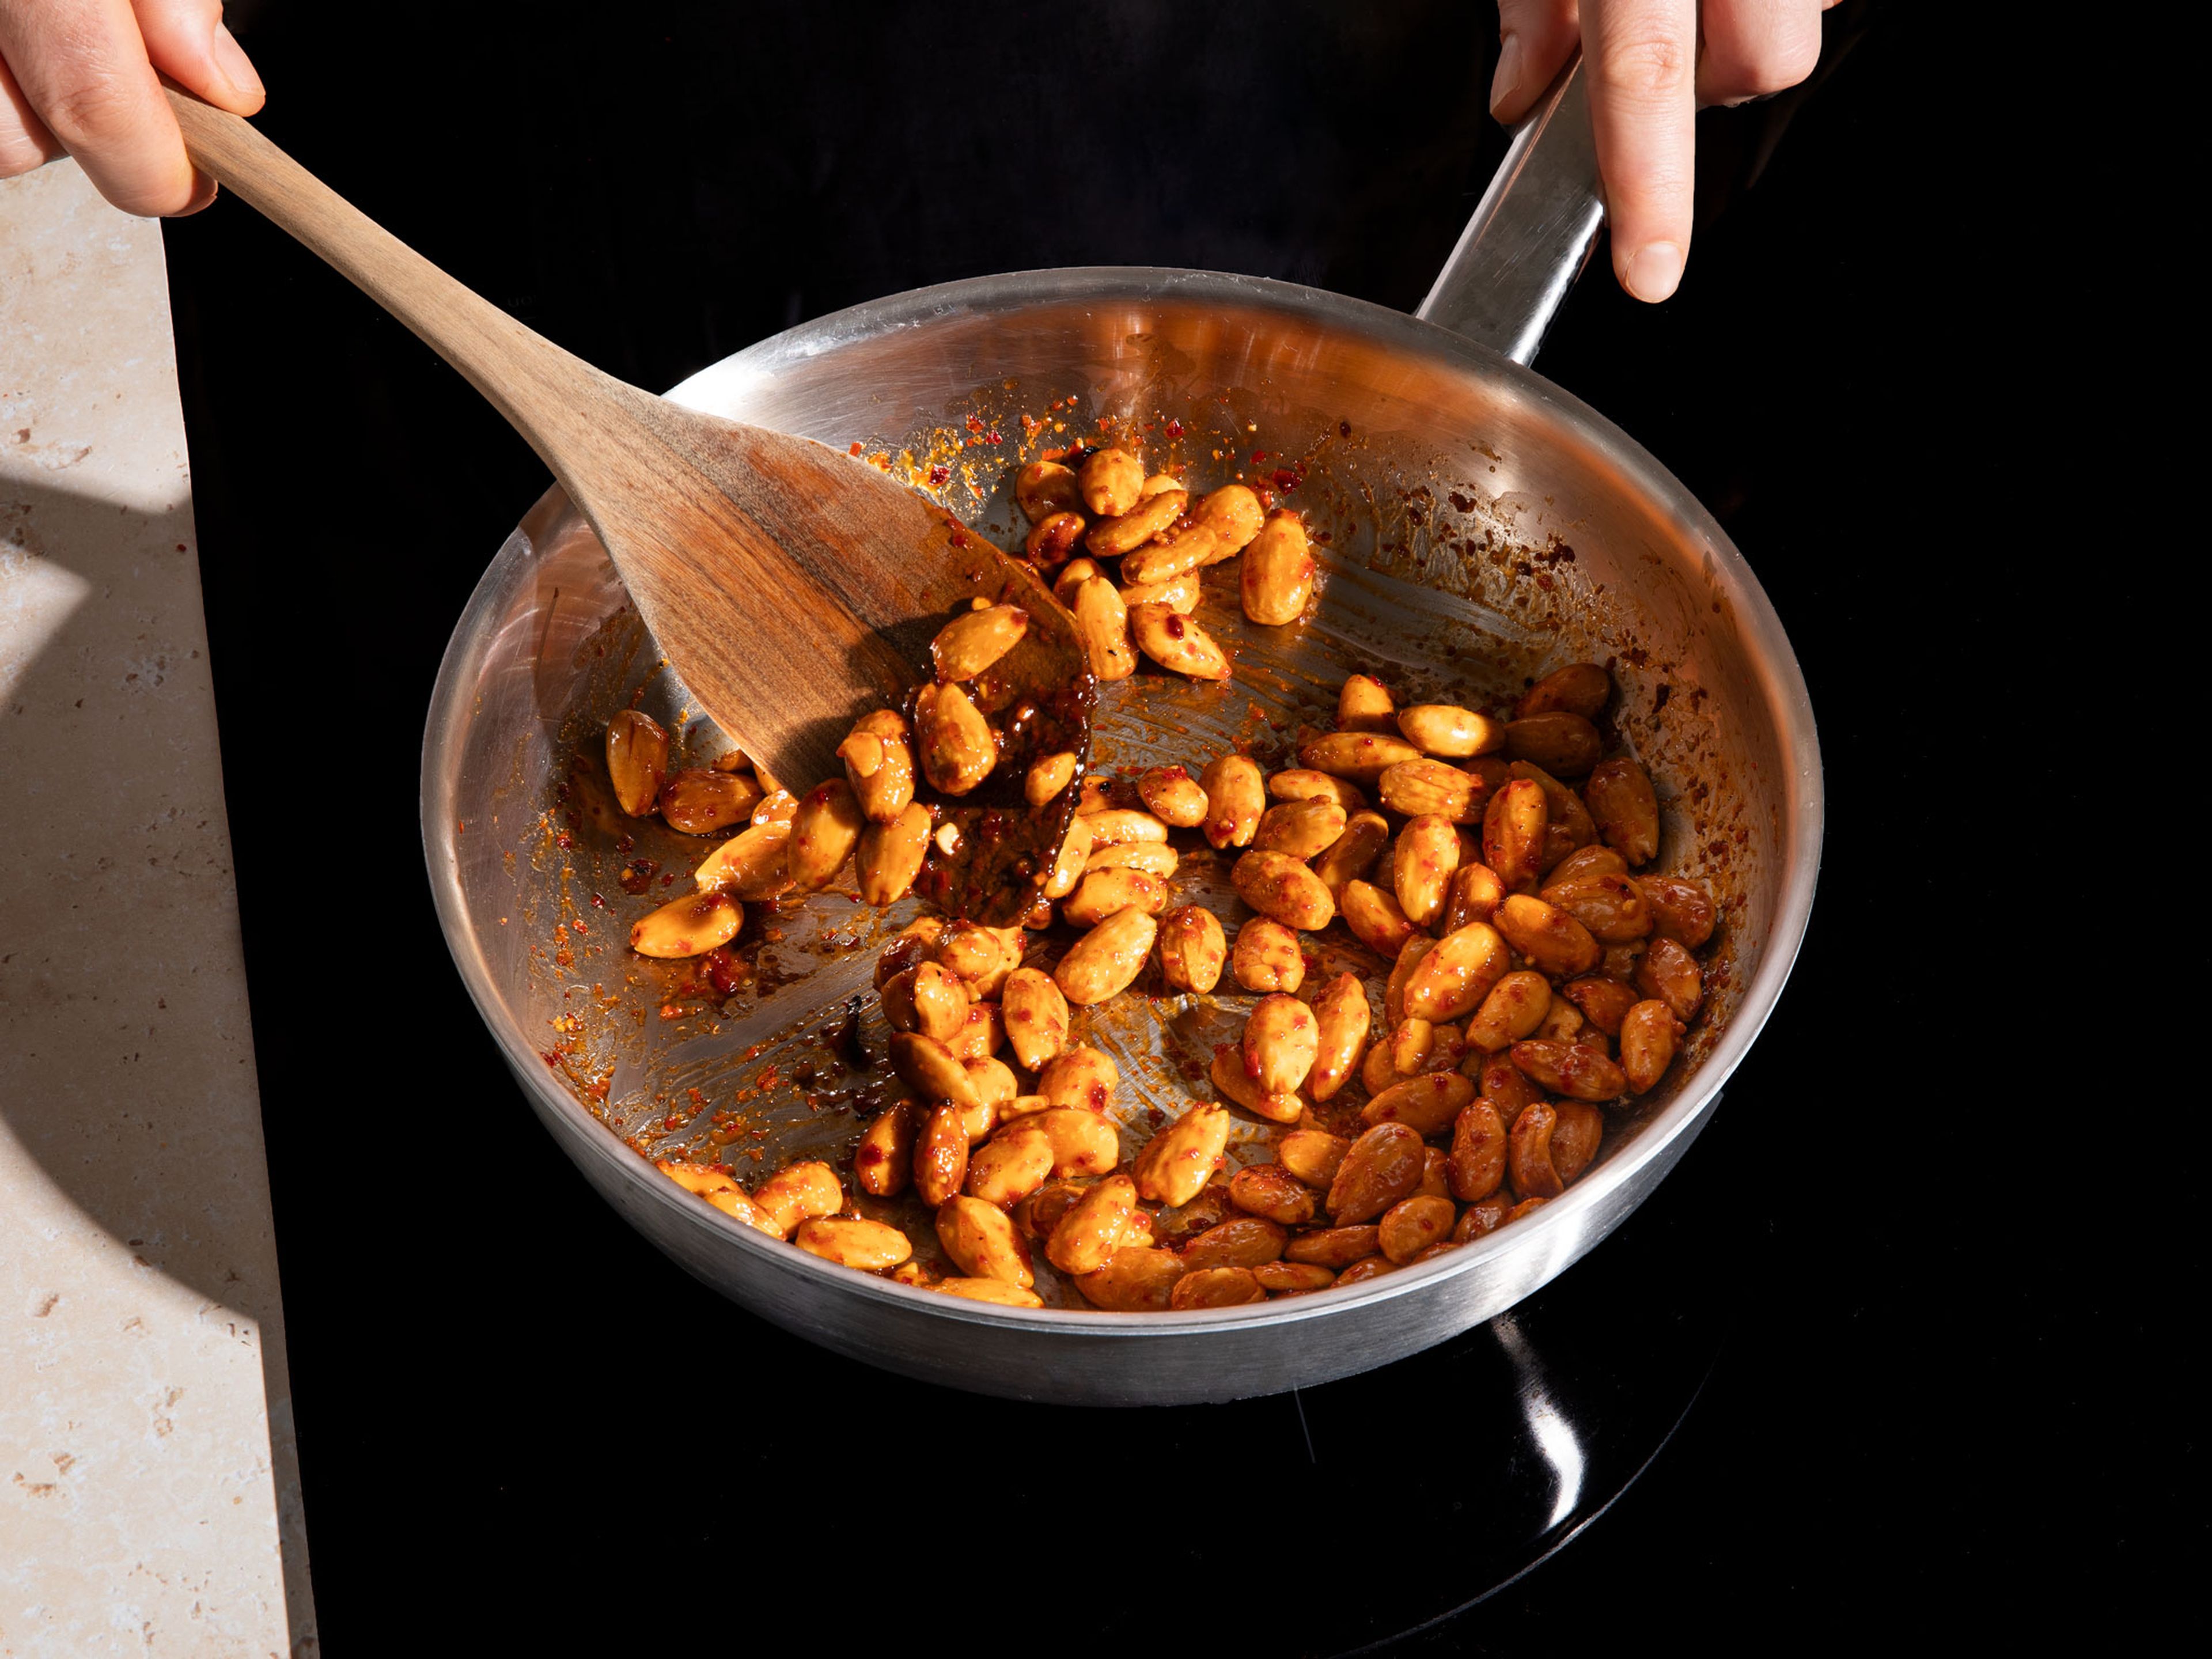 In the meantime, prepare the harissa nuts. Prepare a baking sheet with parchment paper. Mix the maple syrup, harissa and water. Place the nuts in a pan and pour the harissa mixture over them. Stir over a medium heat for approx. 5–10 min. Then transfer to the prepared baking sheet and leave to cool.